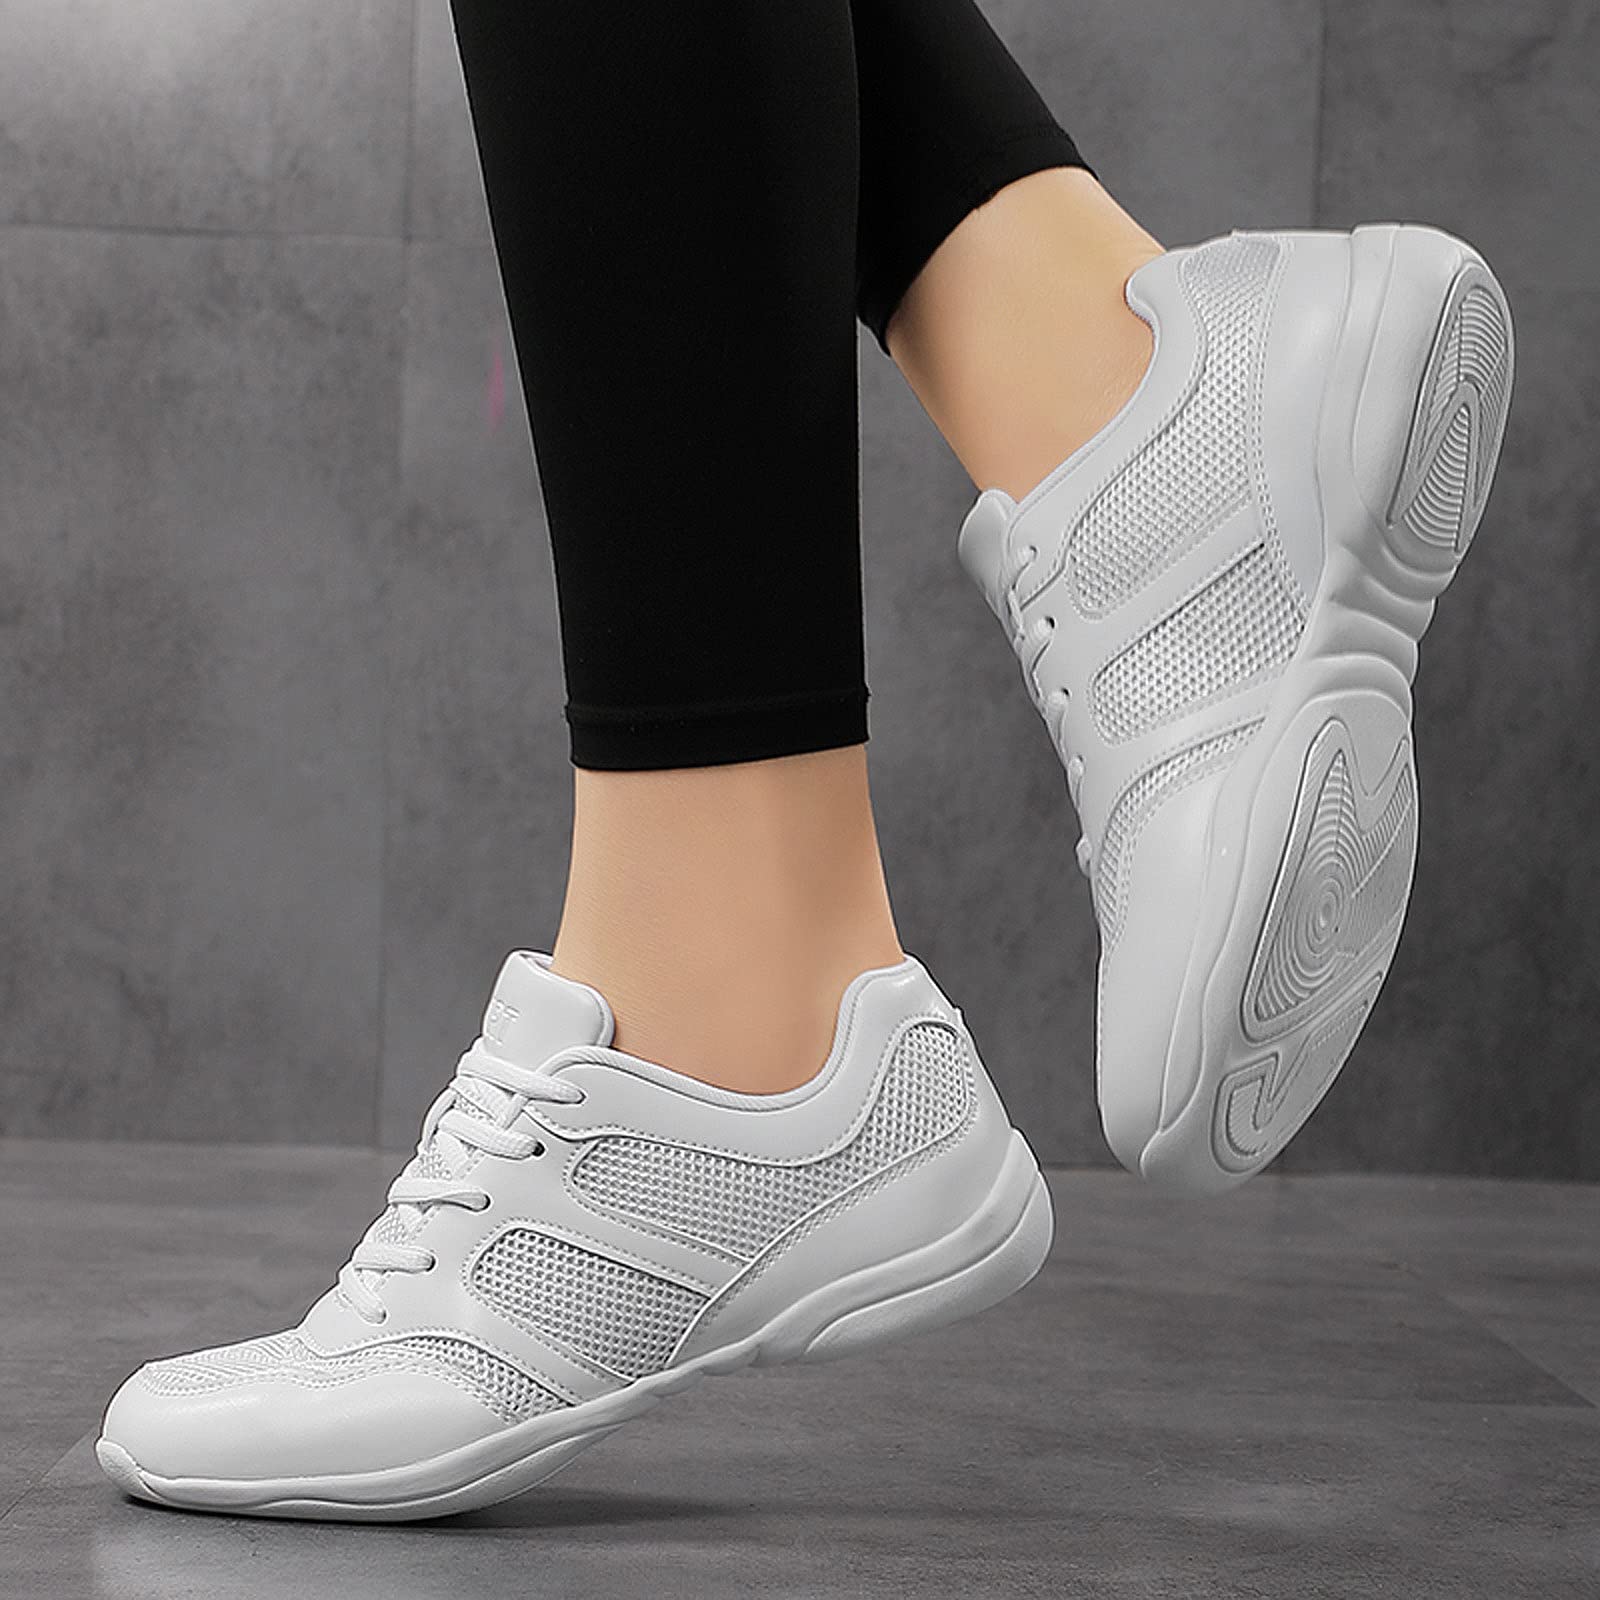 FLIOZY White Cheerleading Shoes Womens Dance Shoes Youth Girls Professional Competition Athletic Walking Sneakers Training Shoes White Half Mesh 39